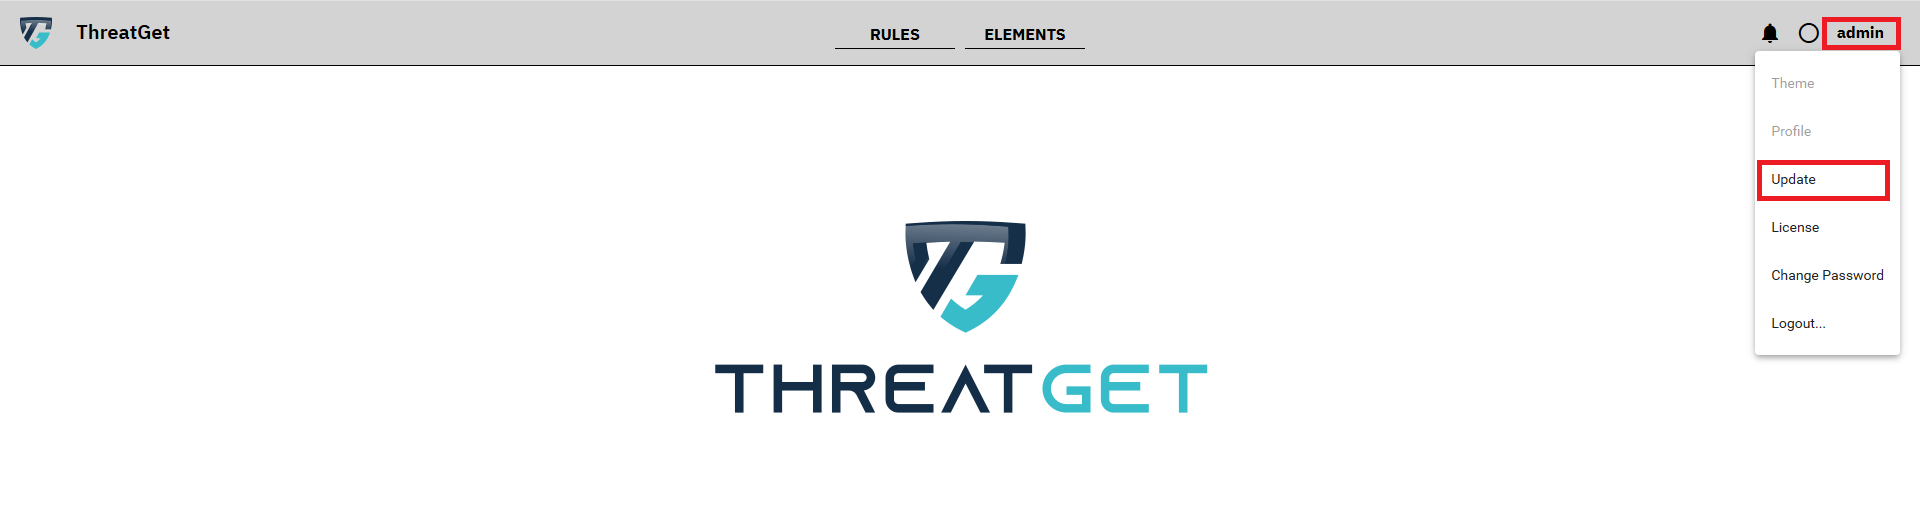 ThreatGet overview screen with marked update button